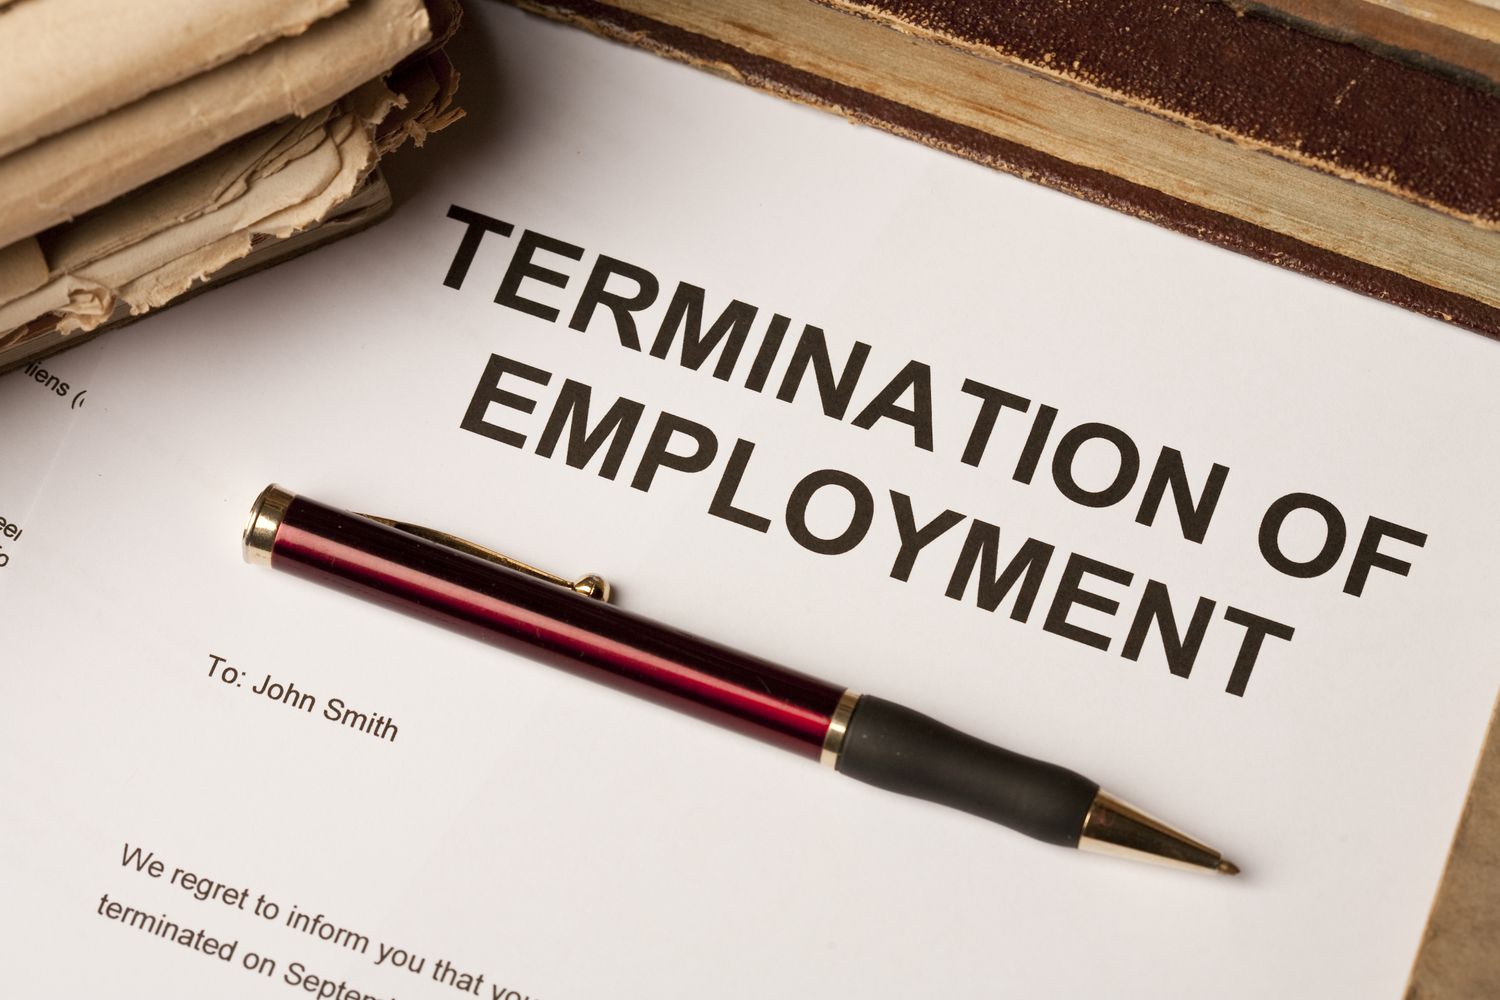 Can I be Terminated at Any Time? – The $150,000 Question